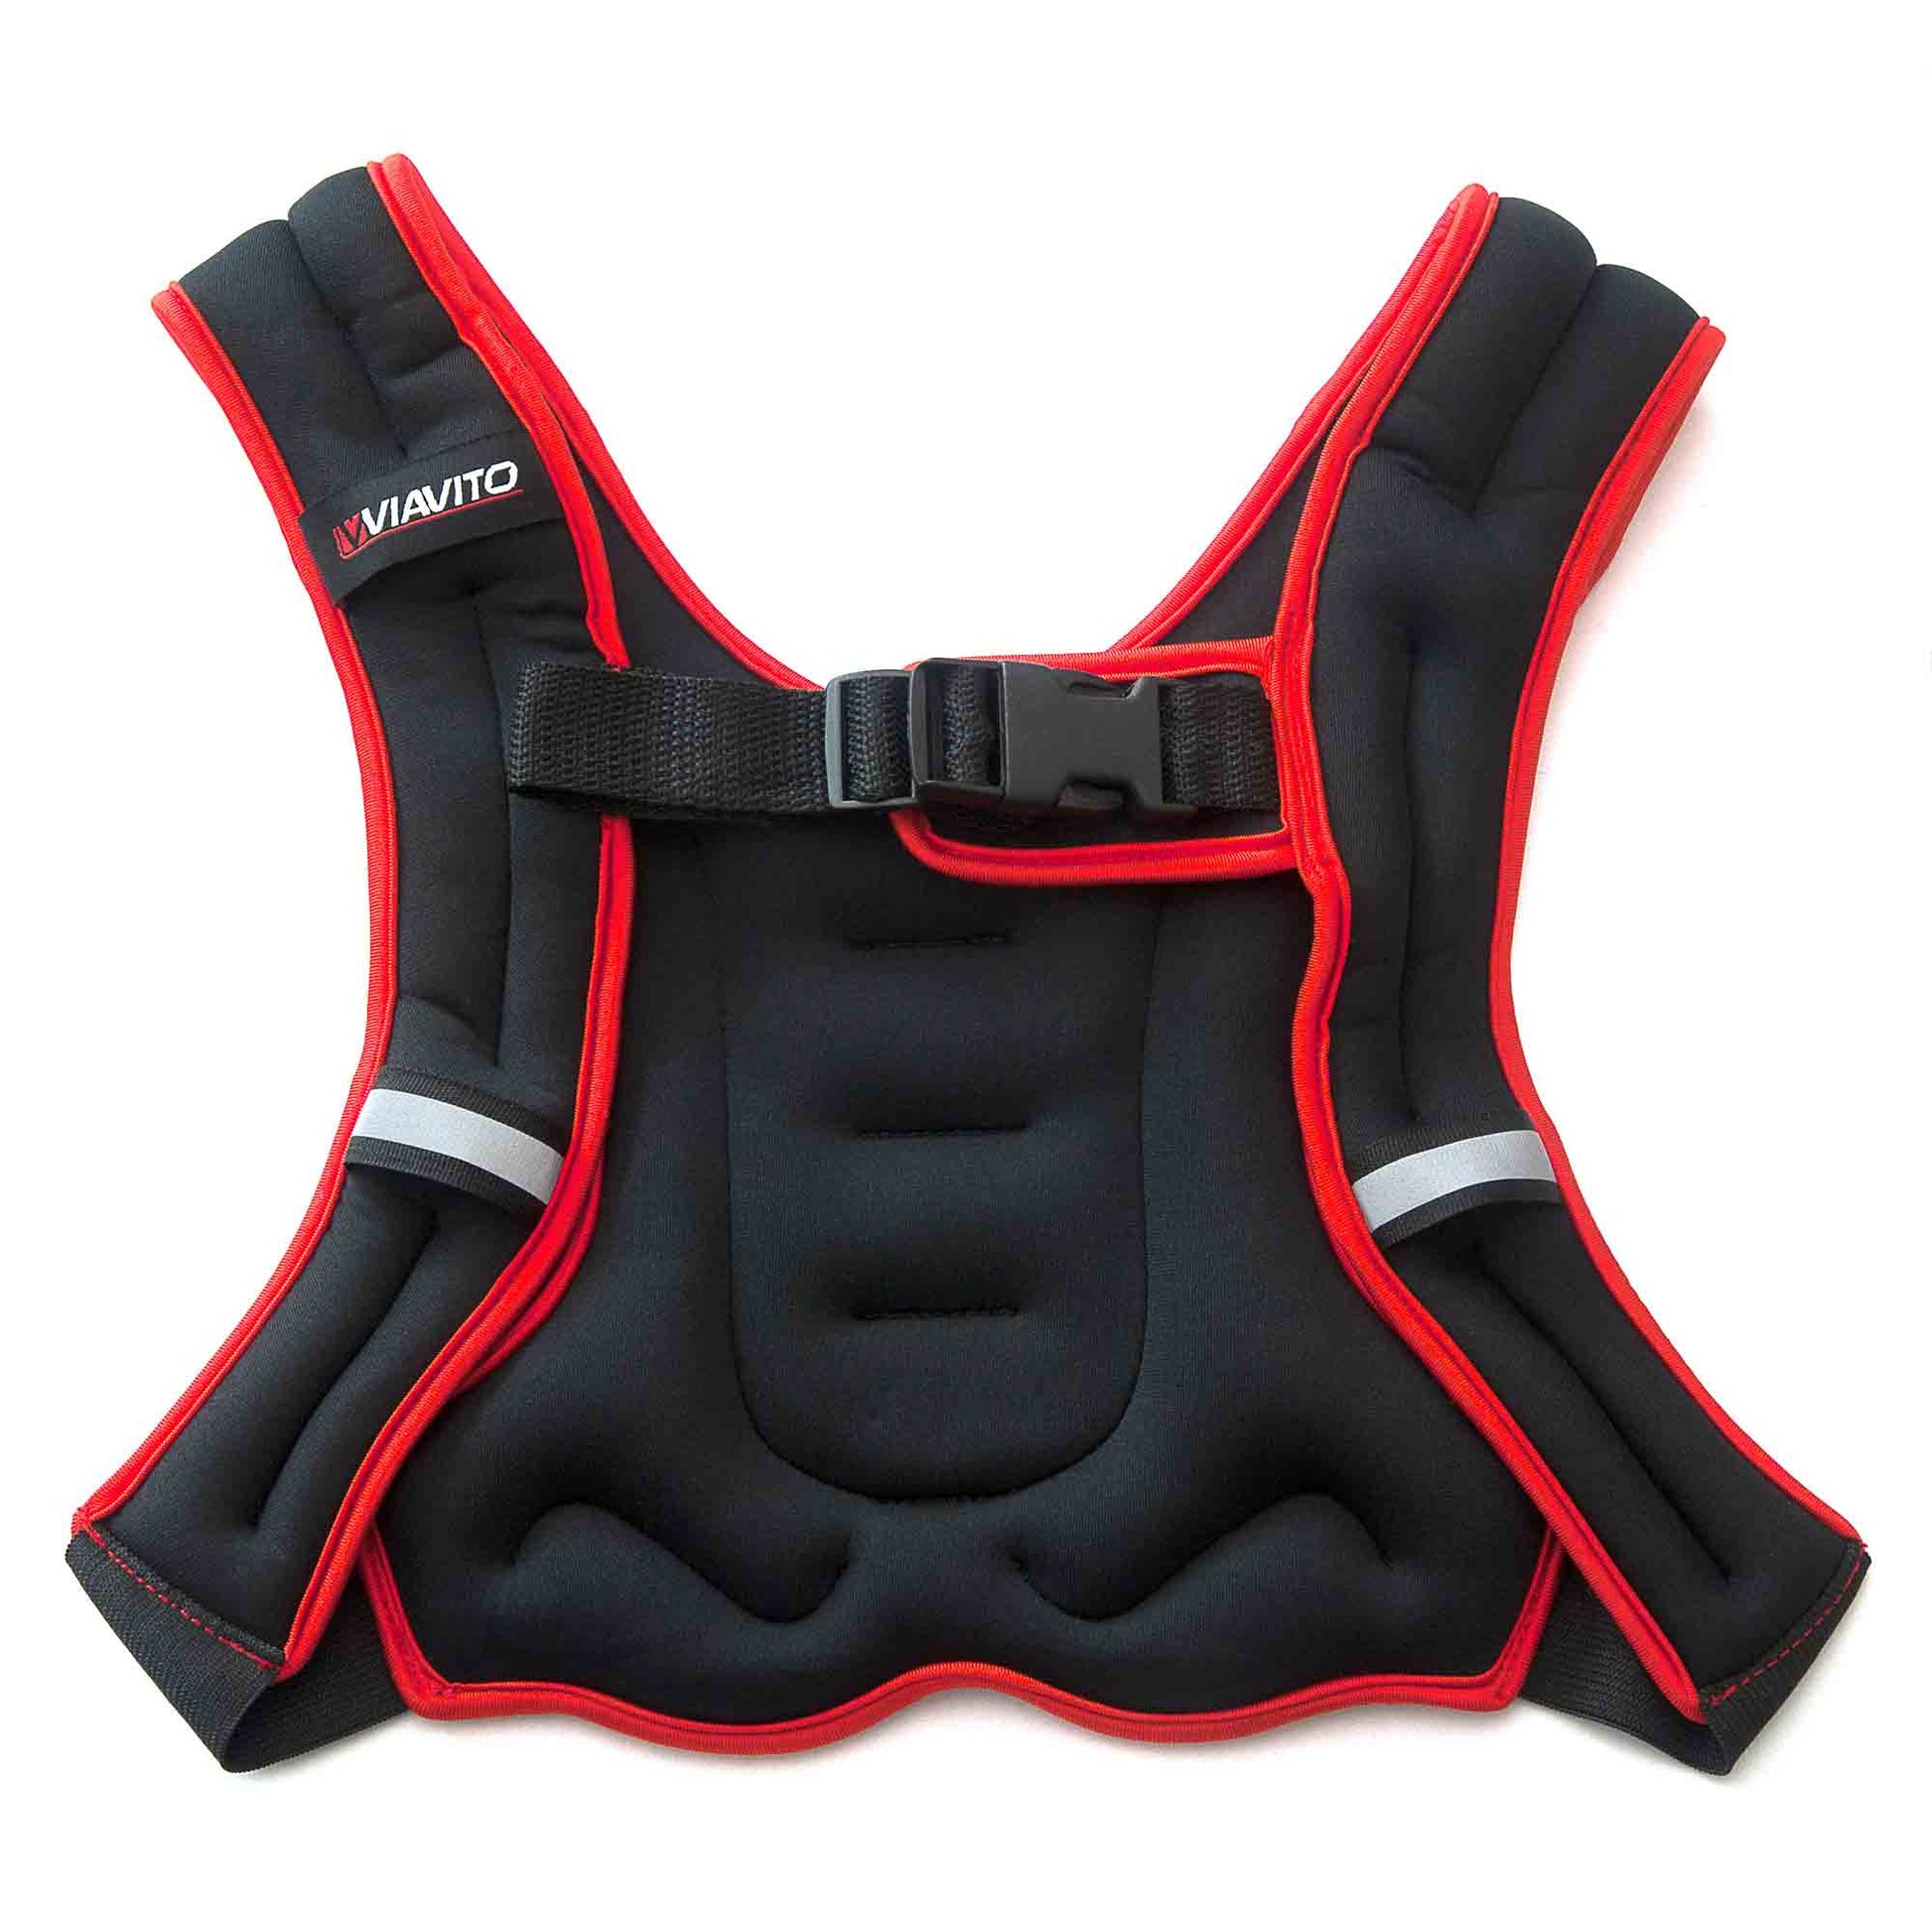 |Viavito 5kg Weighted Vest - Front|